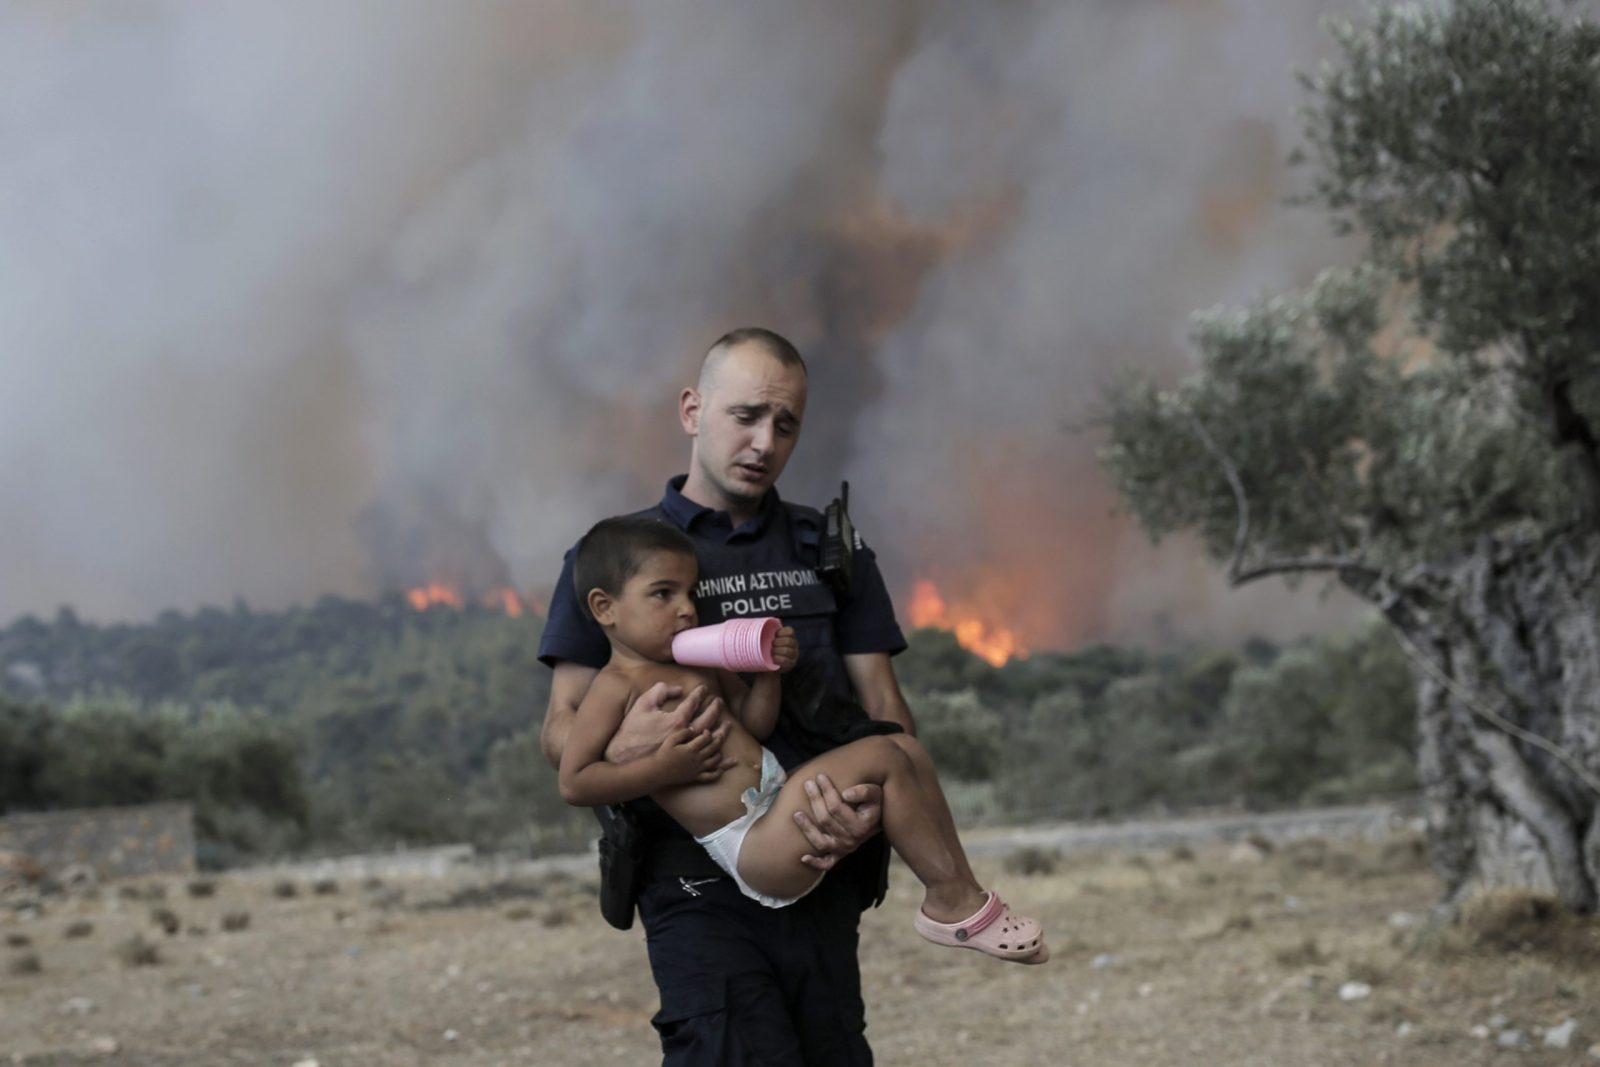 epa10753376 A Police officer Pavlos Terzoglou (26) carries a child as he and his colleagues forcibly evacuate a farmers’  family that refused to leave their property during a wildfire near the village of Palaiokoundouro, in Dervenochoria, northwest of Attica region, Greece, 18 July 2023. There are still active fires in Dervenochoria, in spite of the intervention of water-bombing aircraft according to government sources. A message was sent to people in Attica and the wider area around Dervenochoria via the emergency number 112, instructing them to stay indoors and close their doors and windows due to the ongoing wildfire.  EPA/KOSTAS TSIRONIS